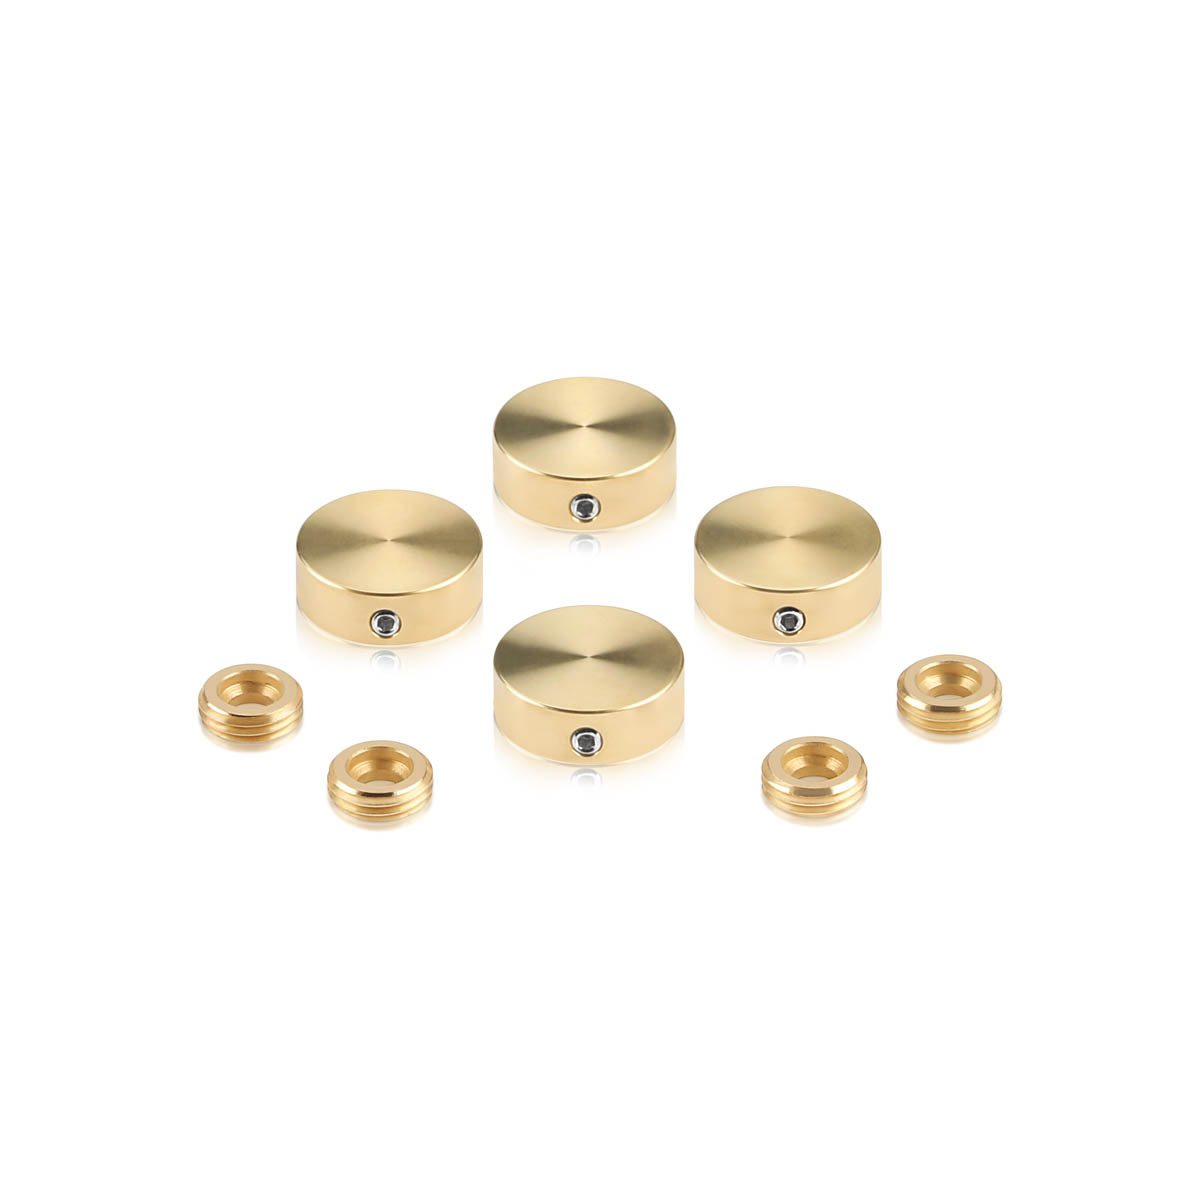 Set of 4 Locking Screw Cover, Diameter: (Less 3/4''), Brass Plain Finish, (Indoor or Outdoor Use)